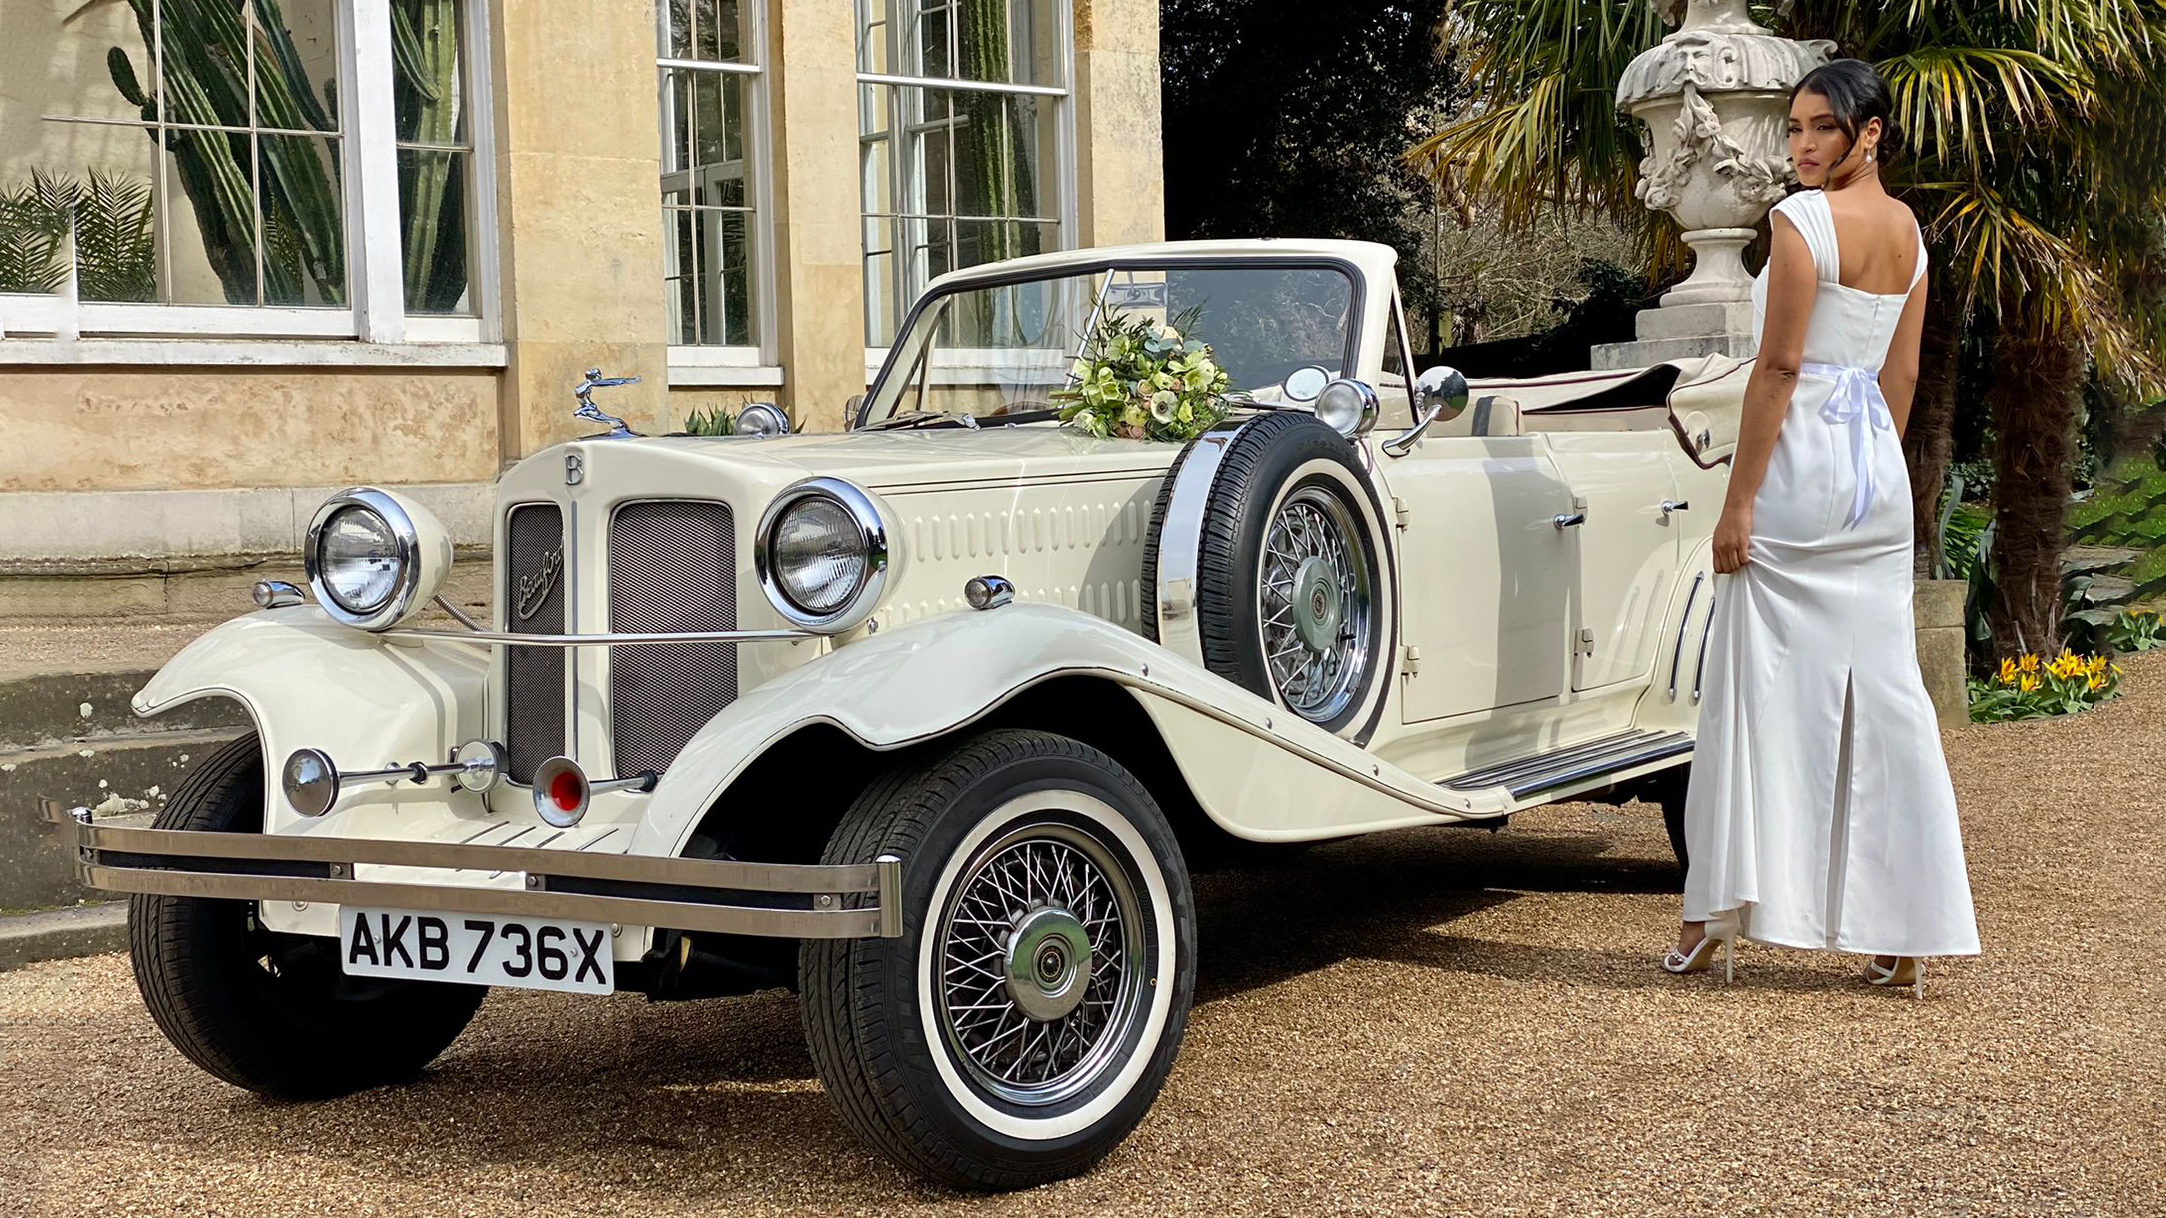 Vintage Ivory Beauford with roof down and spare mounted wheel on the side of the vehicle with bride standing by the car wearing a white dress